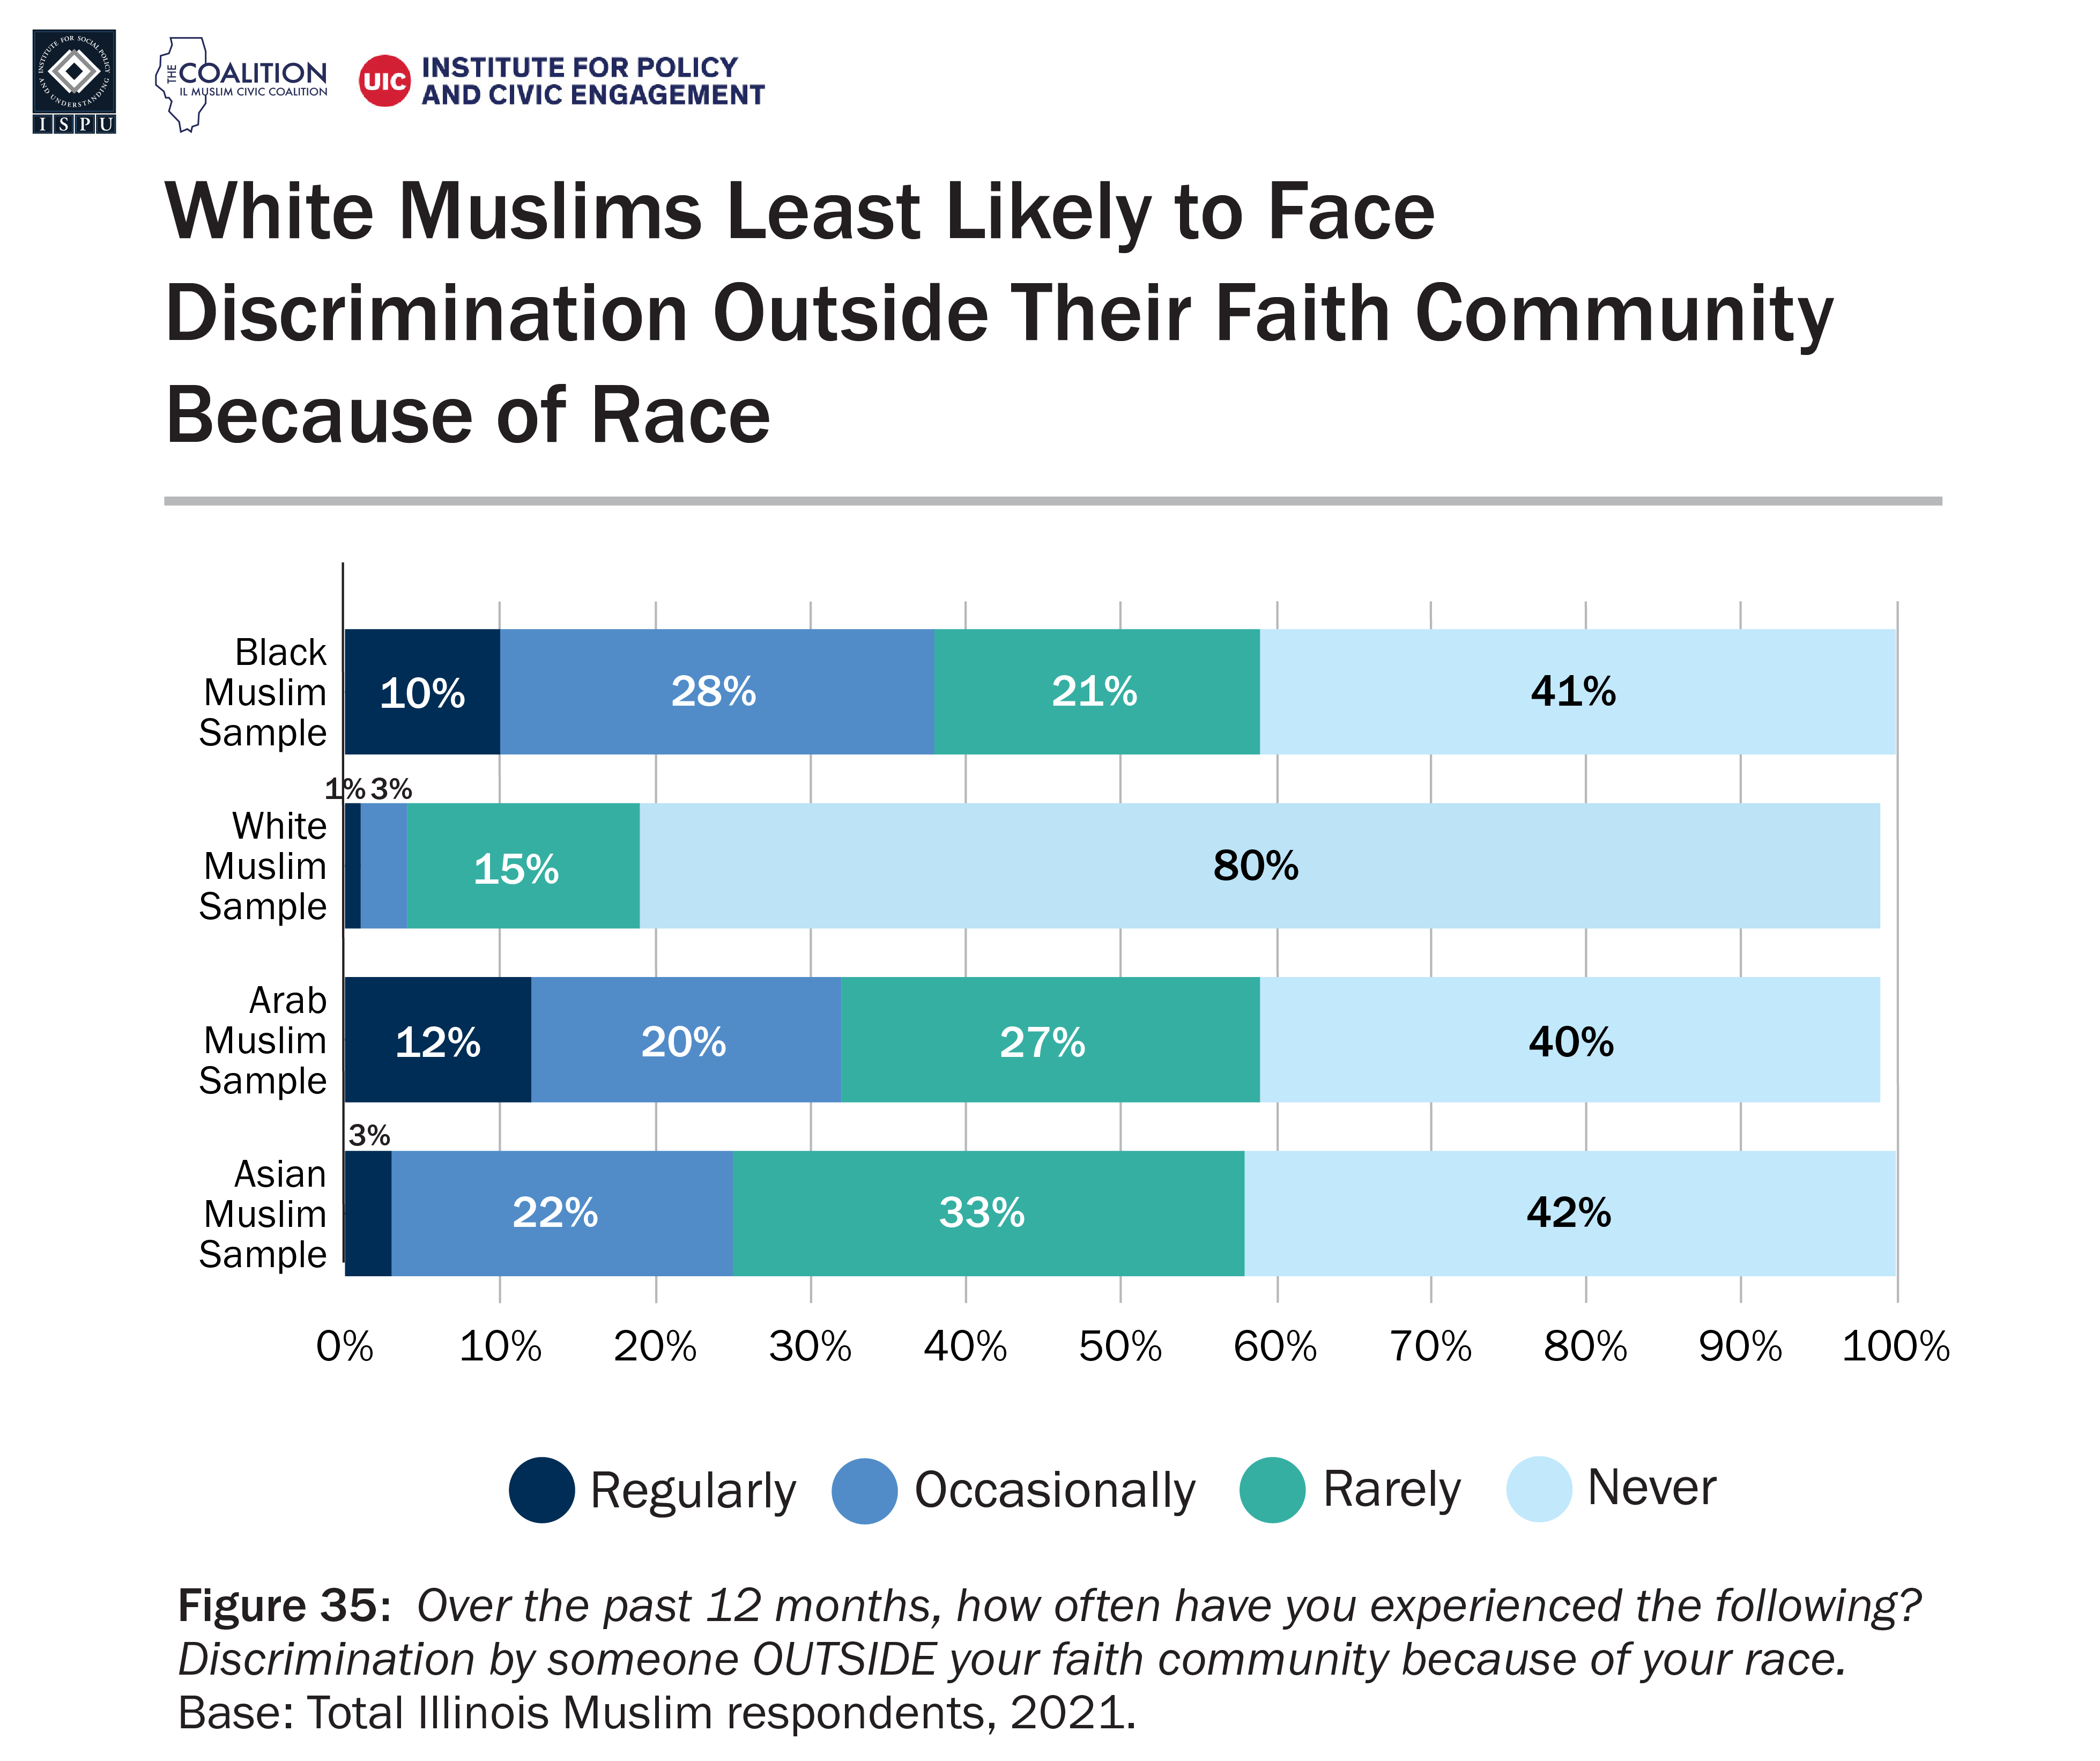 A bar graph showing frequency of experiencing racial discrimination by someone outside faith community by race among Illinois Muslim sample